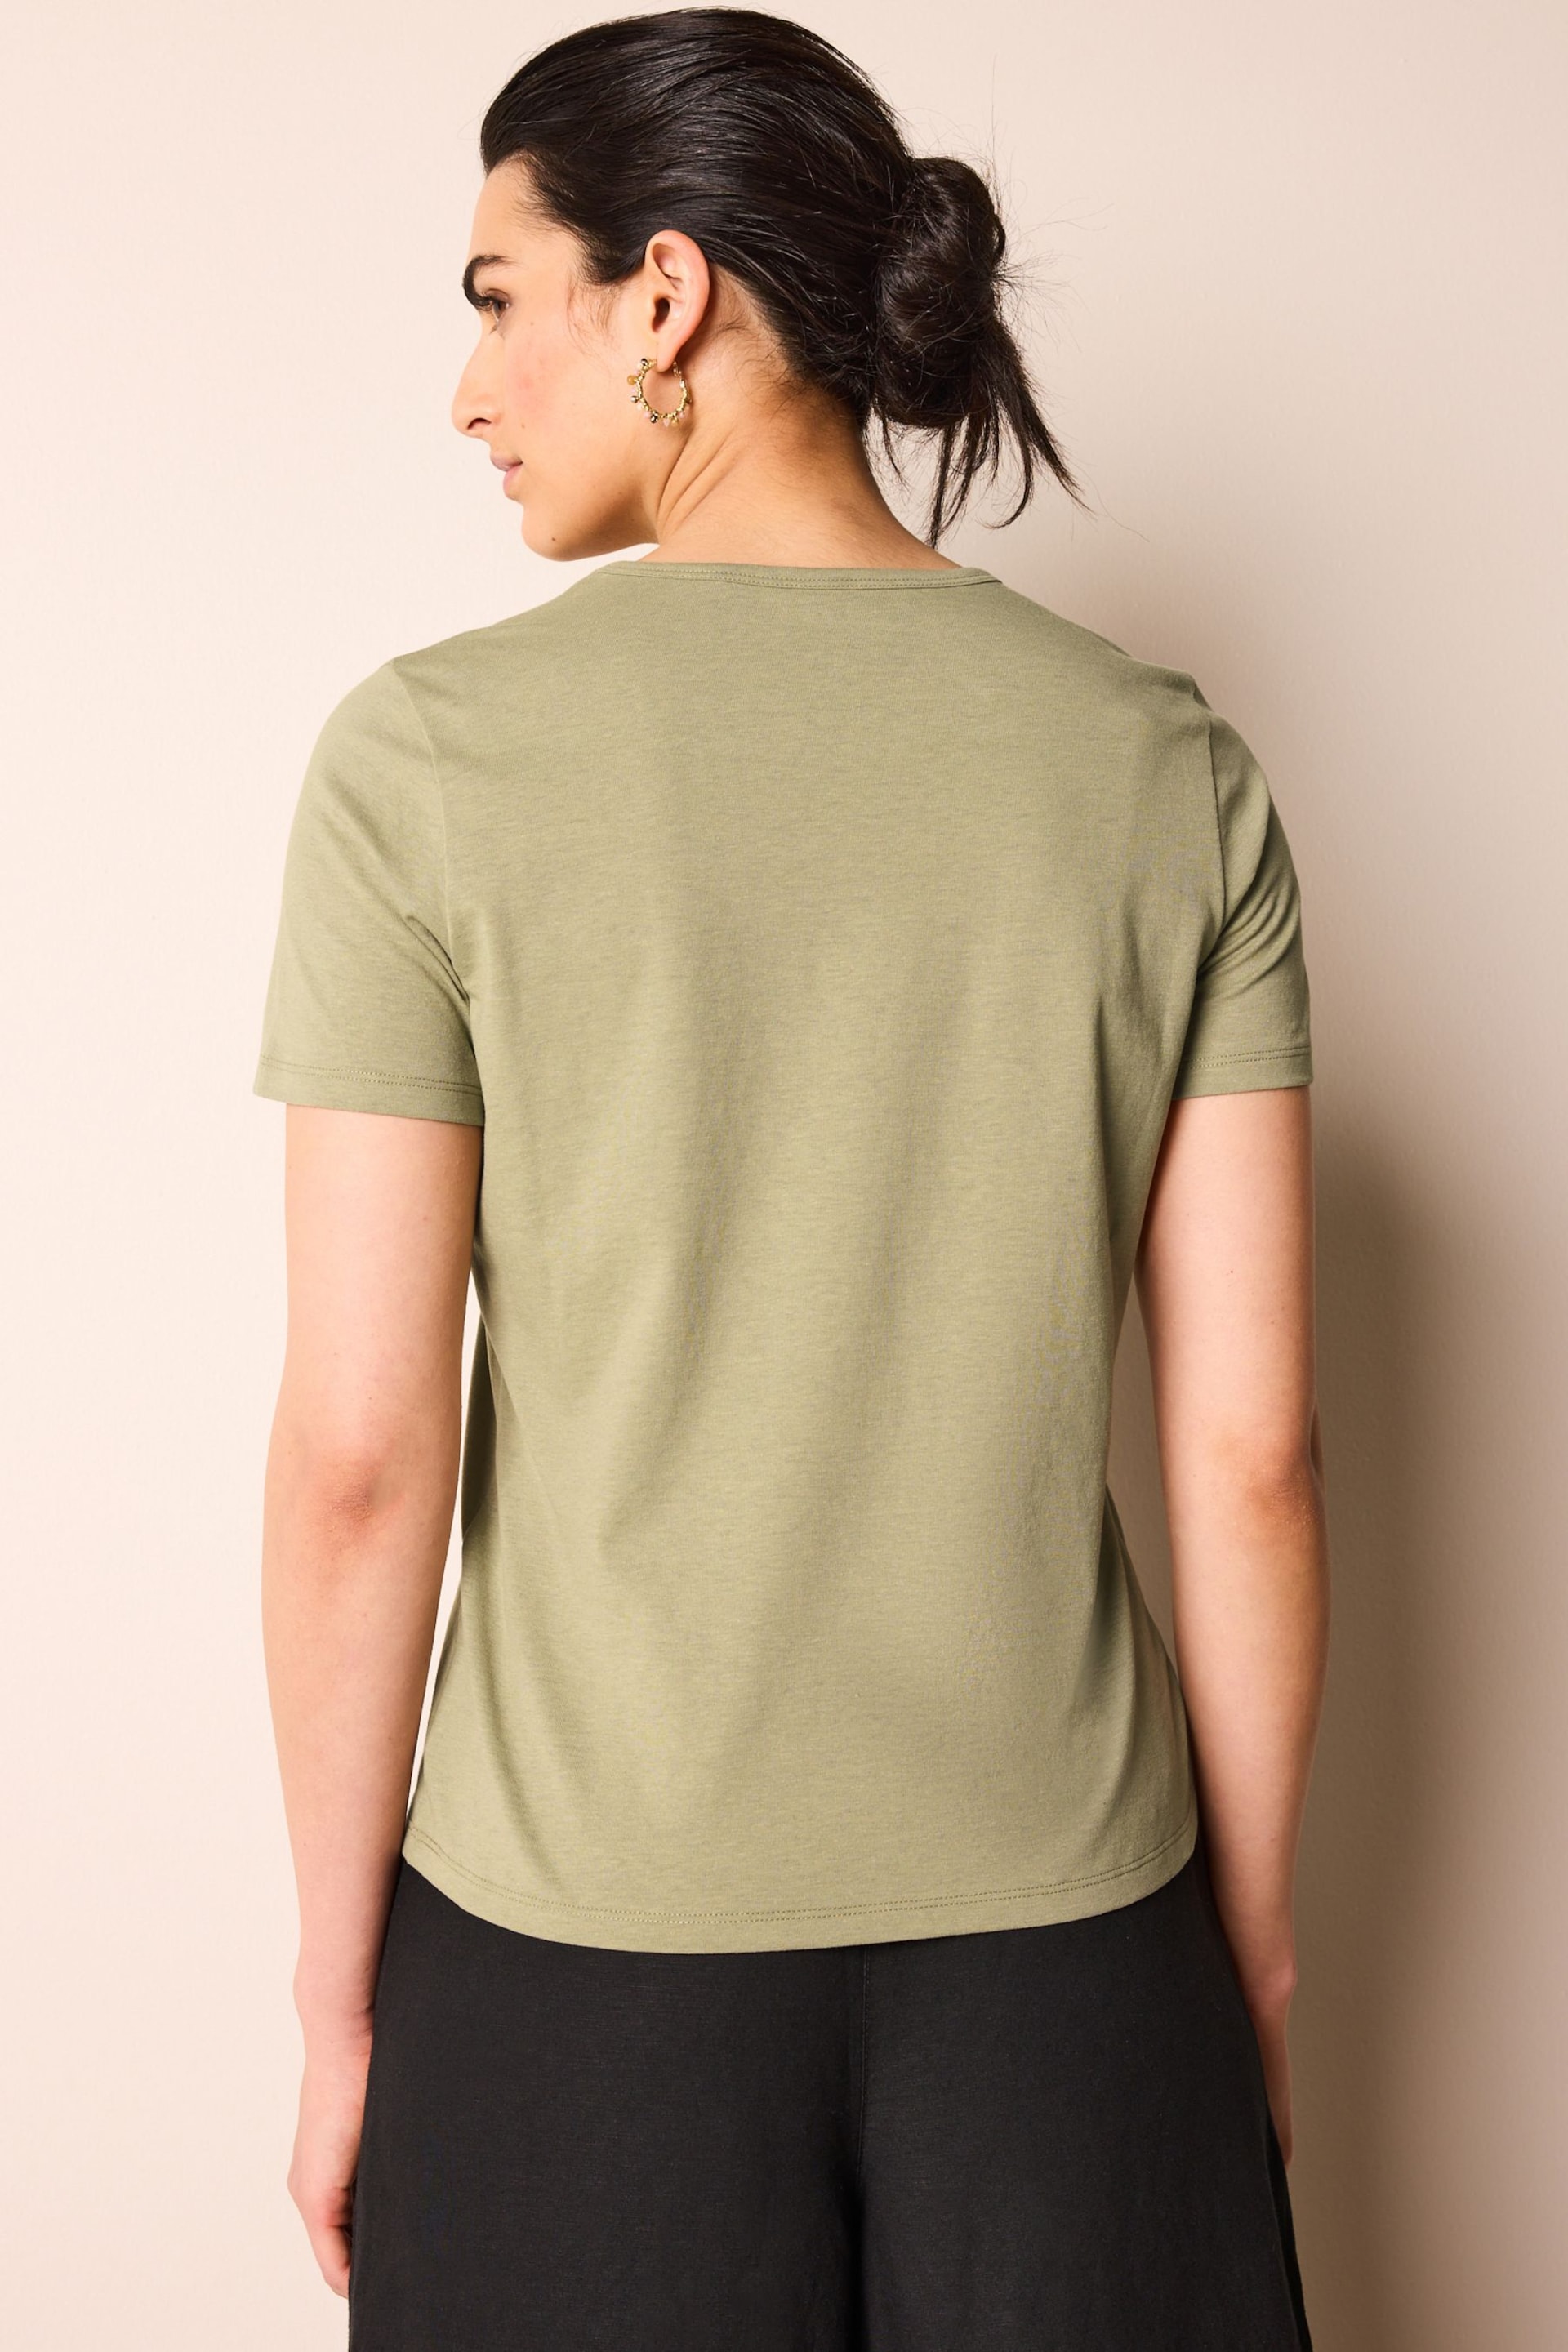 Olive Green The Everyday Crew Neck Cotton Rich Short Sleeve T-Shirt - Image 3 of 5